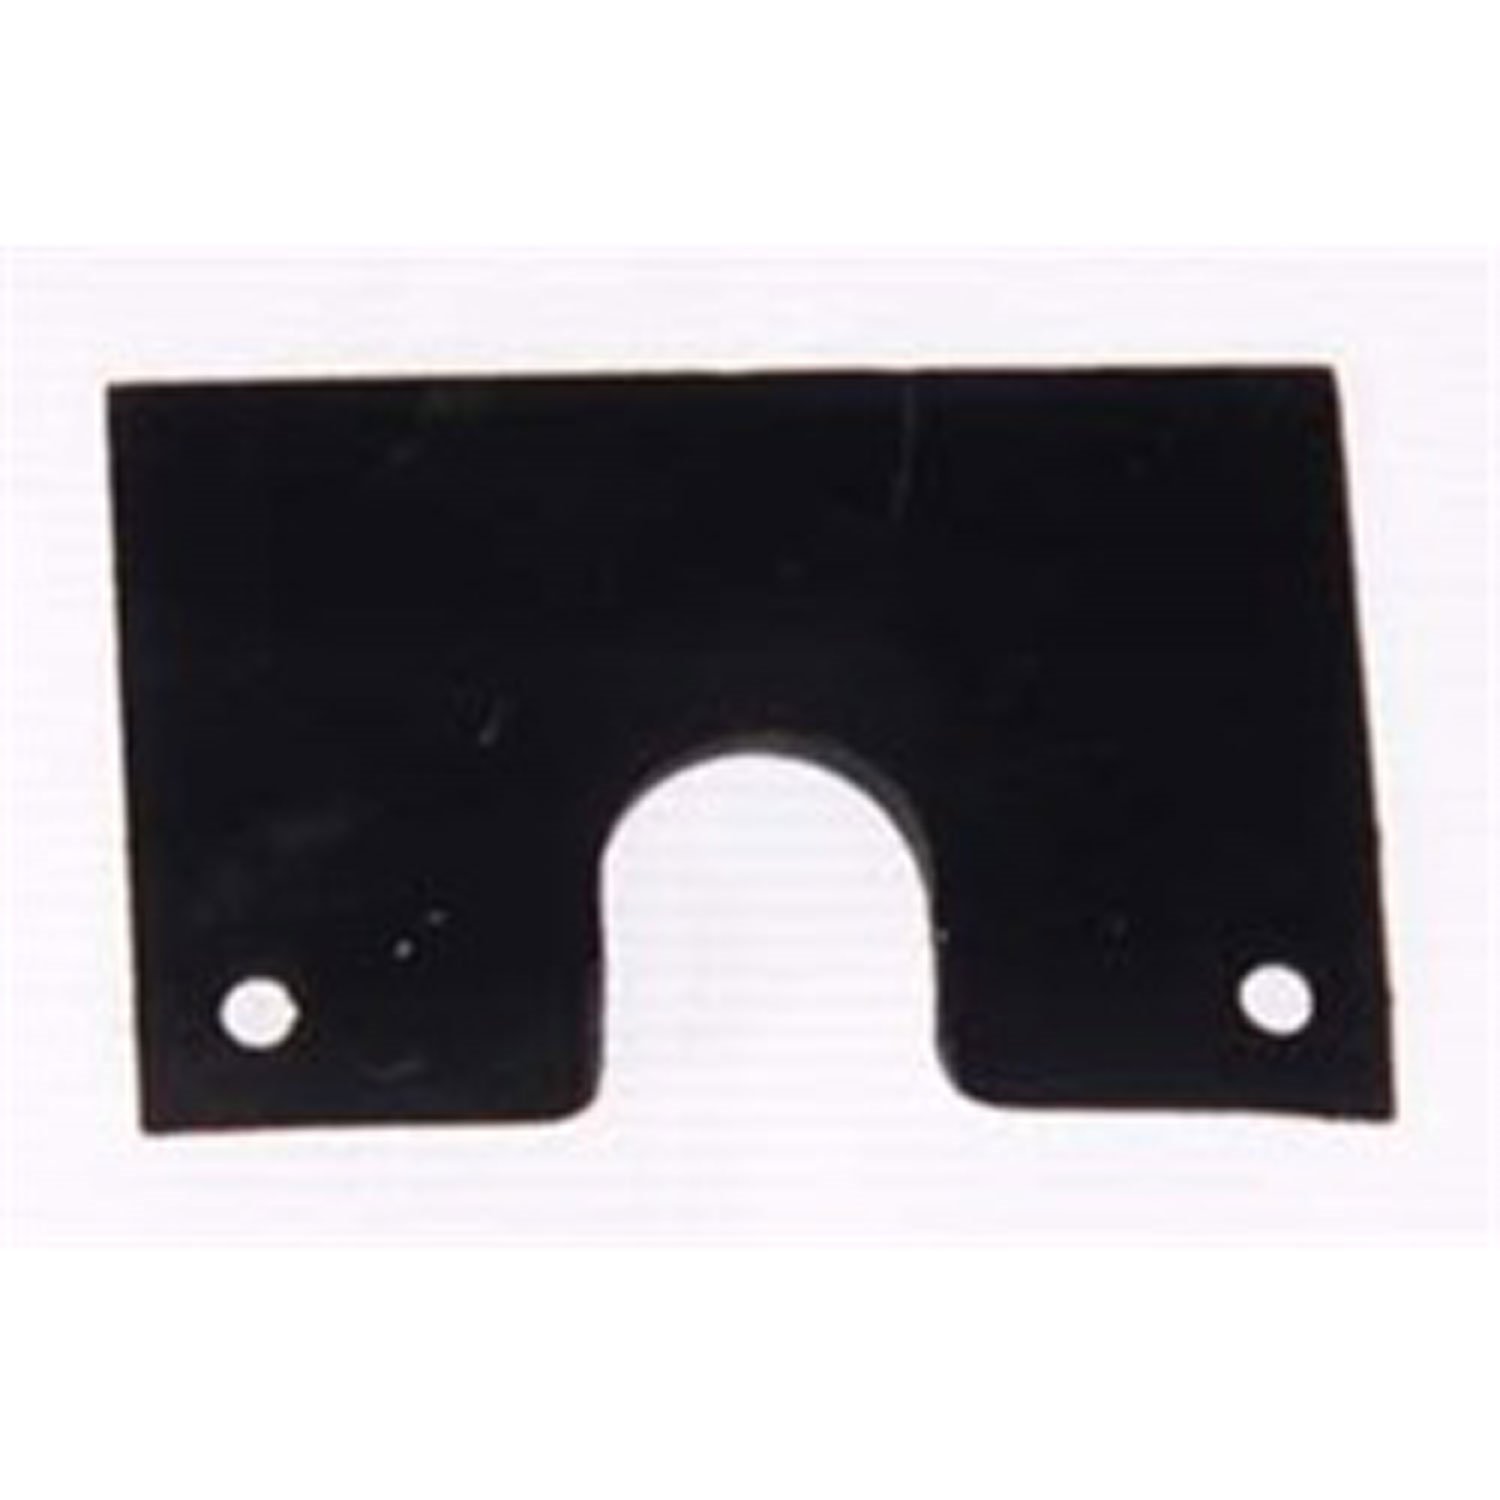 This reproduction rear seat pivot bracket from Omix-ADA